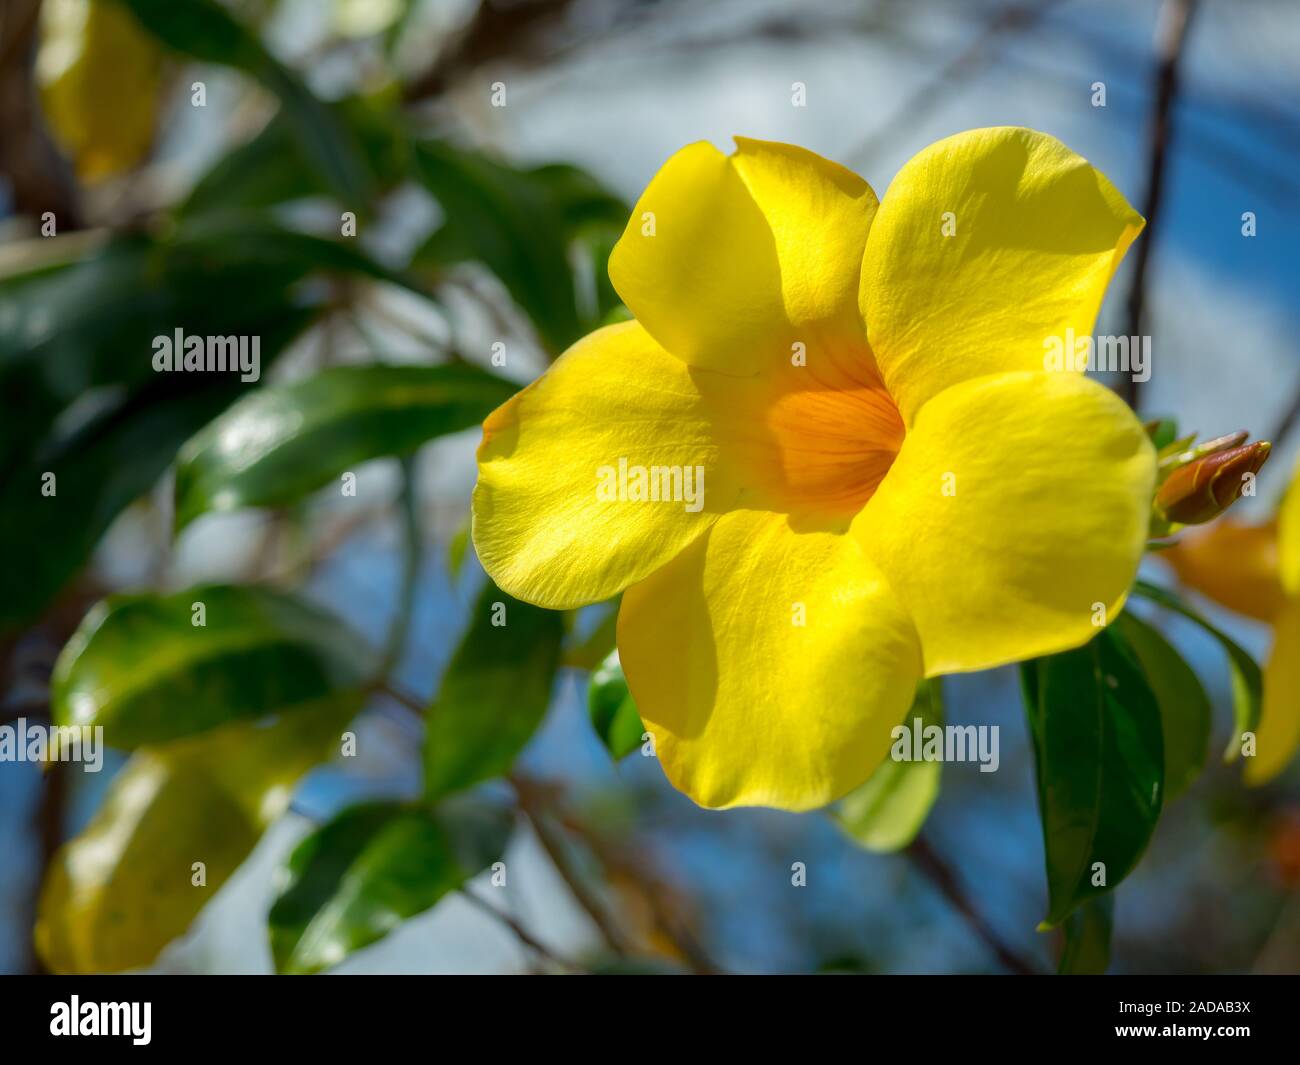 Close-up yellow flower background. Allamanda cathartica or golden trumpet or yellow bell with green leaves. Stock Photo